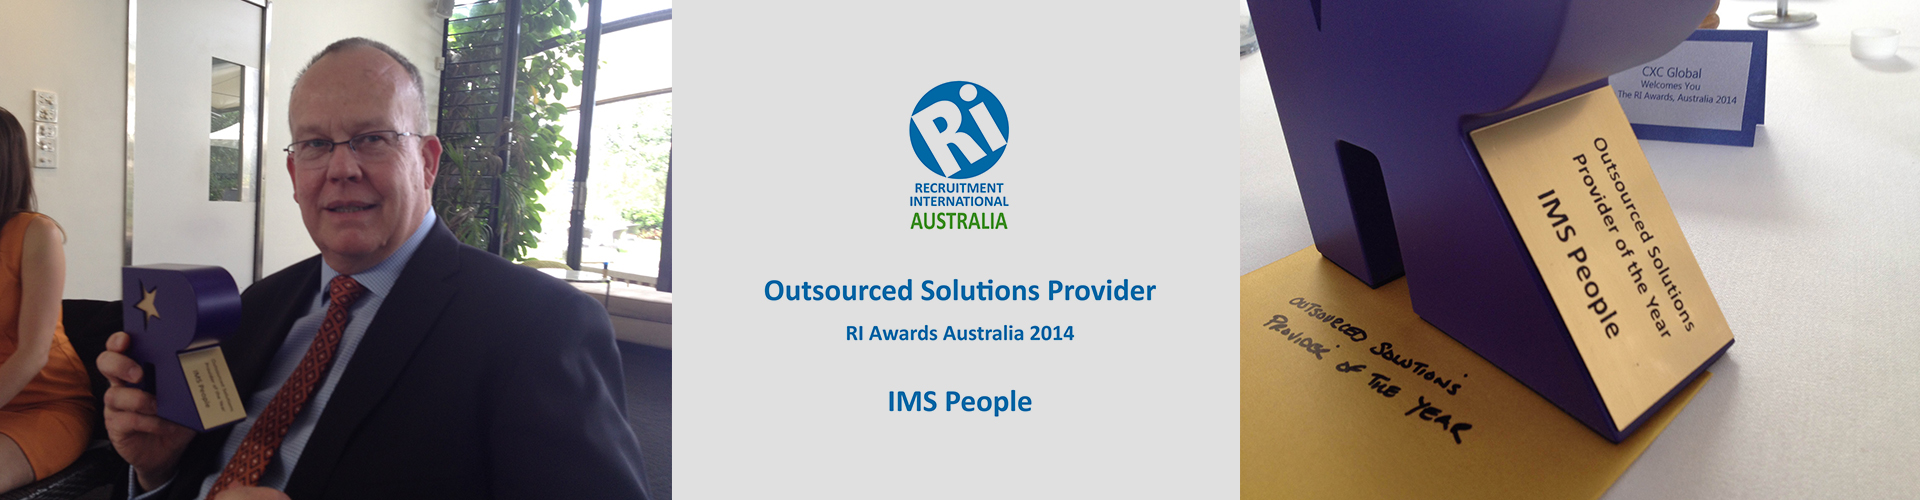 wins “Outsourced Solution Provider Of The Year” award at RI awards ceremony